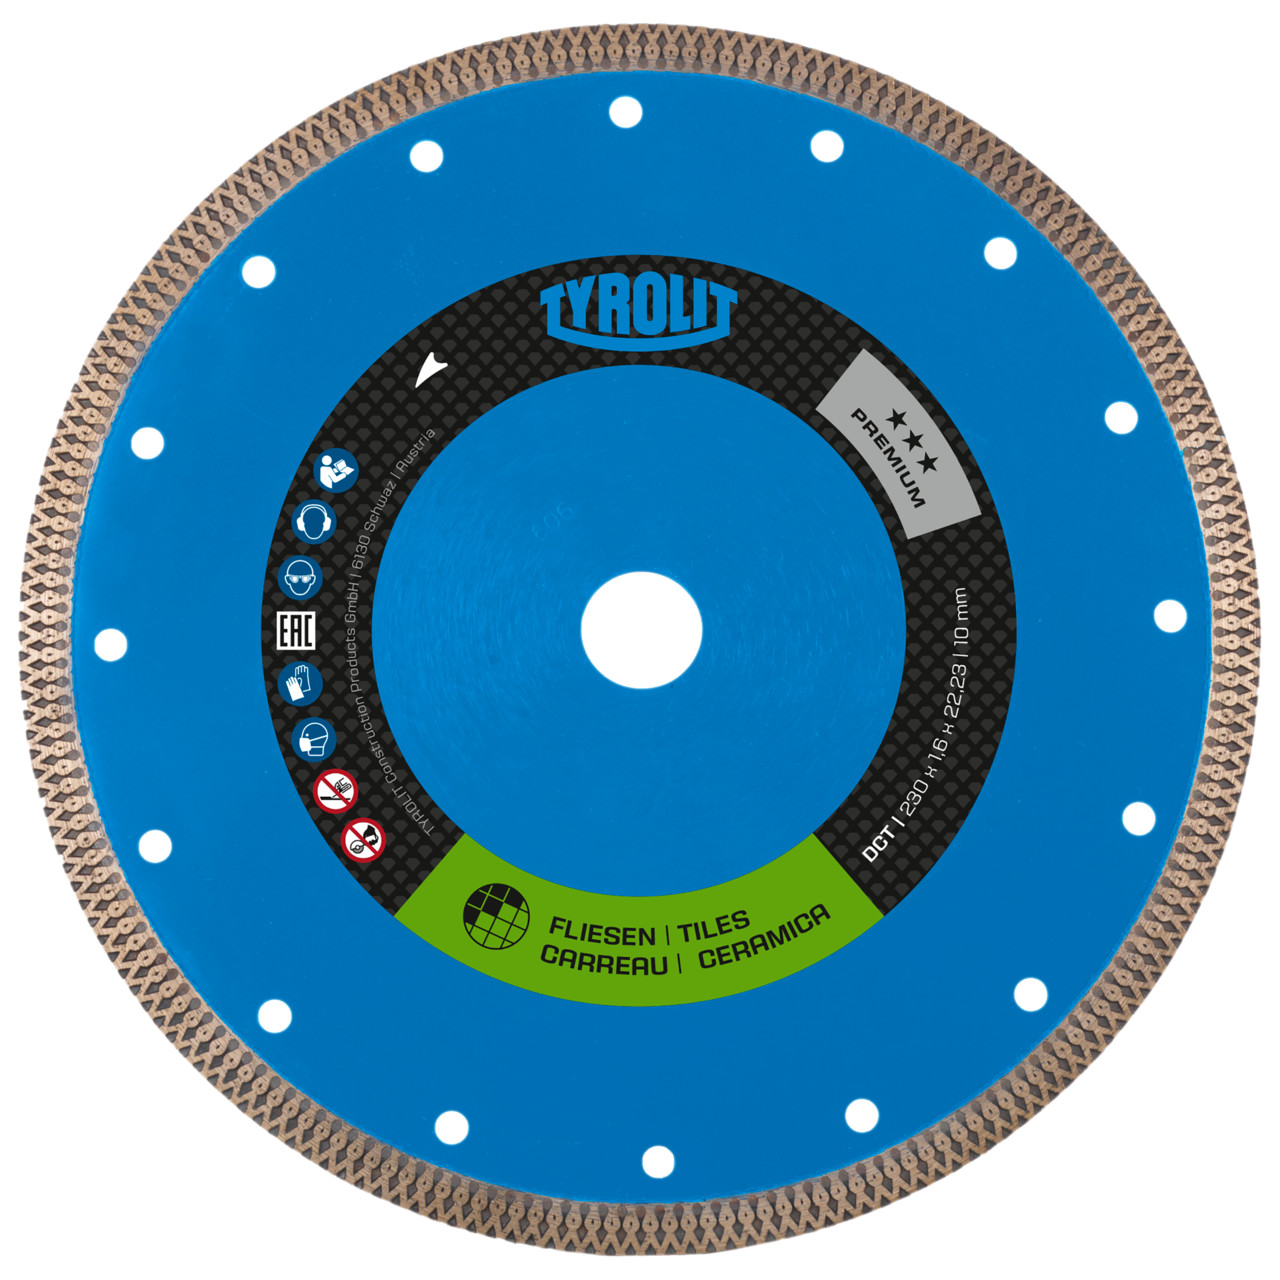 TYROLIT dry-cutting saw blades DxDxH 125x1.2x22.23 DCT, shape: 1A1R (cut-off wheel with continuous cutting wheel), Art. 639560